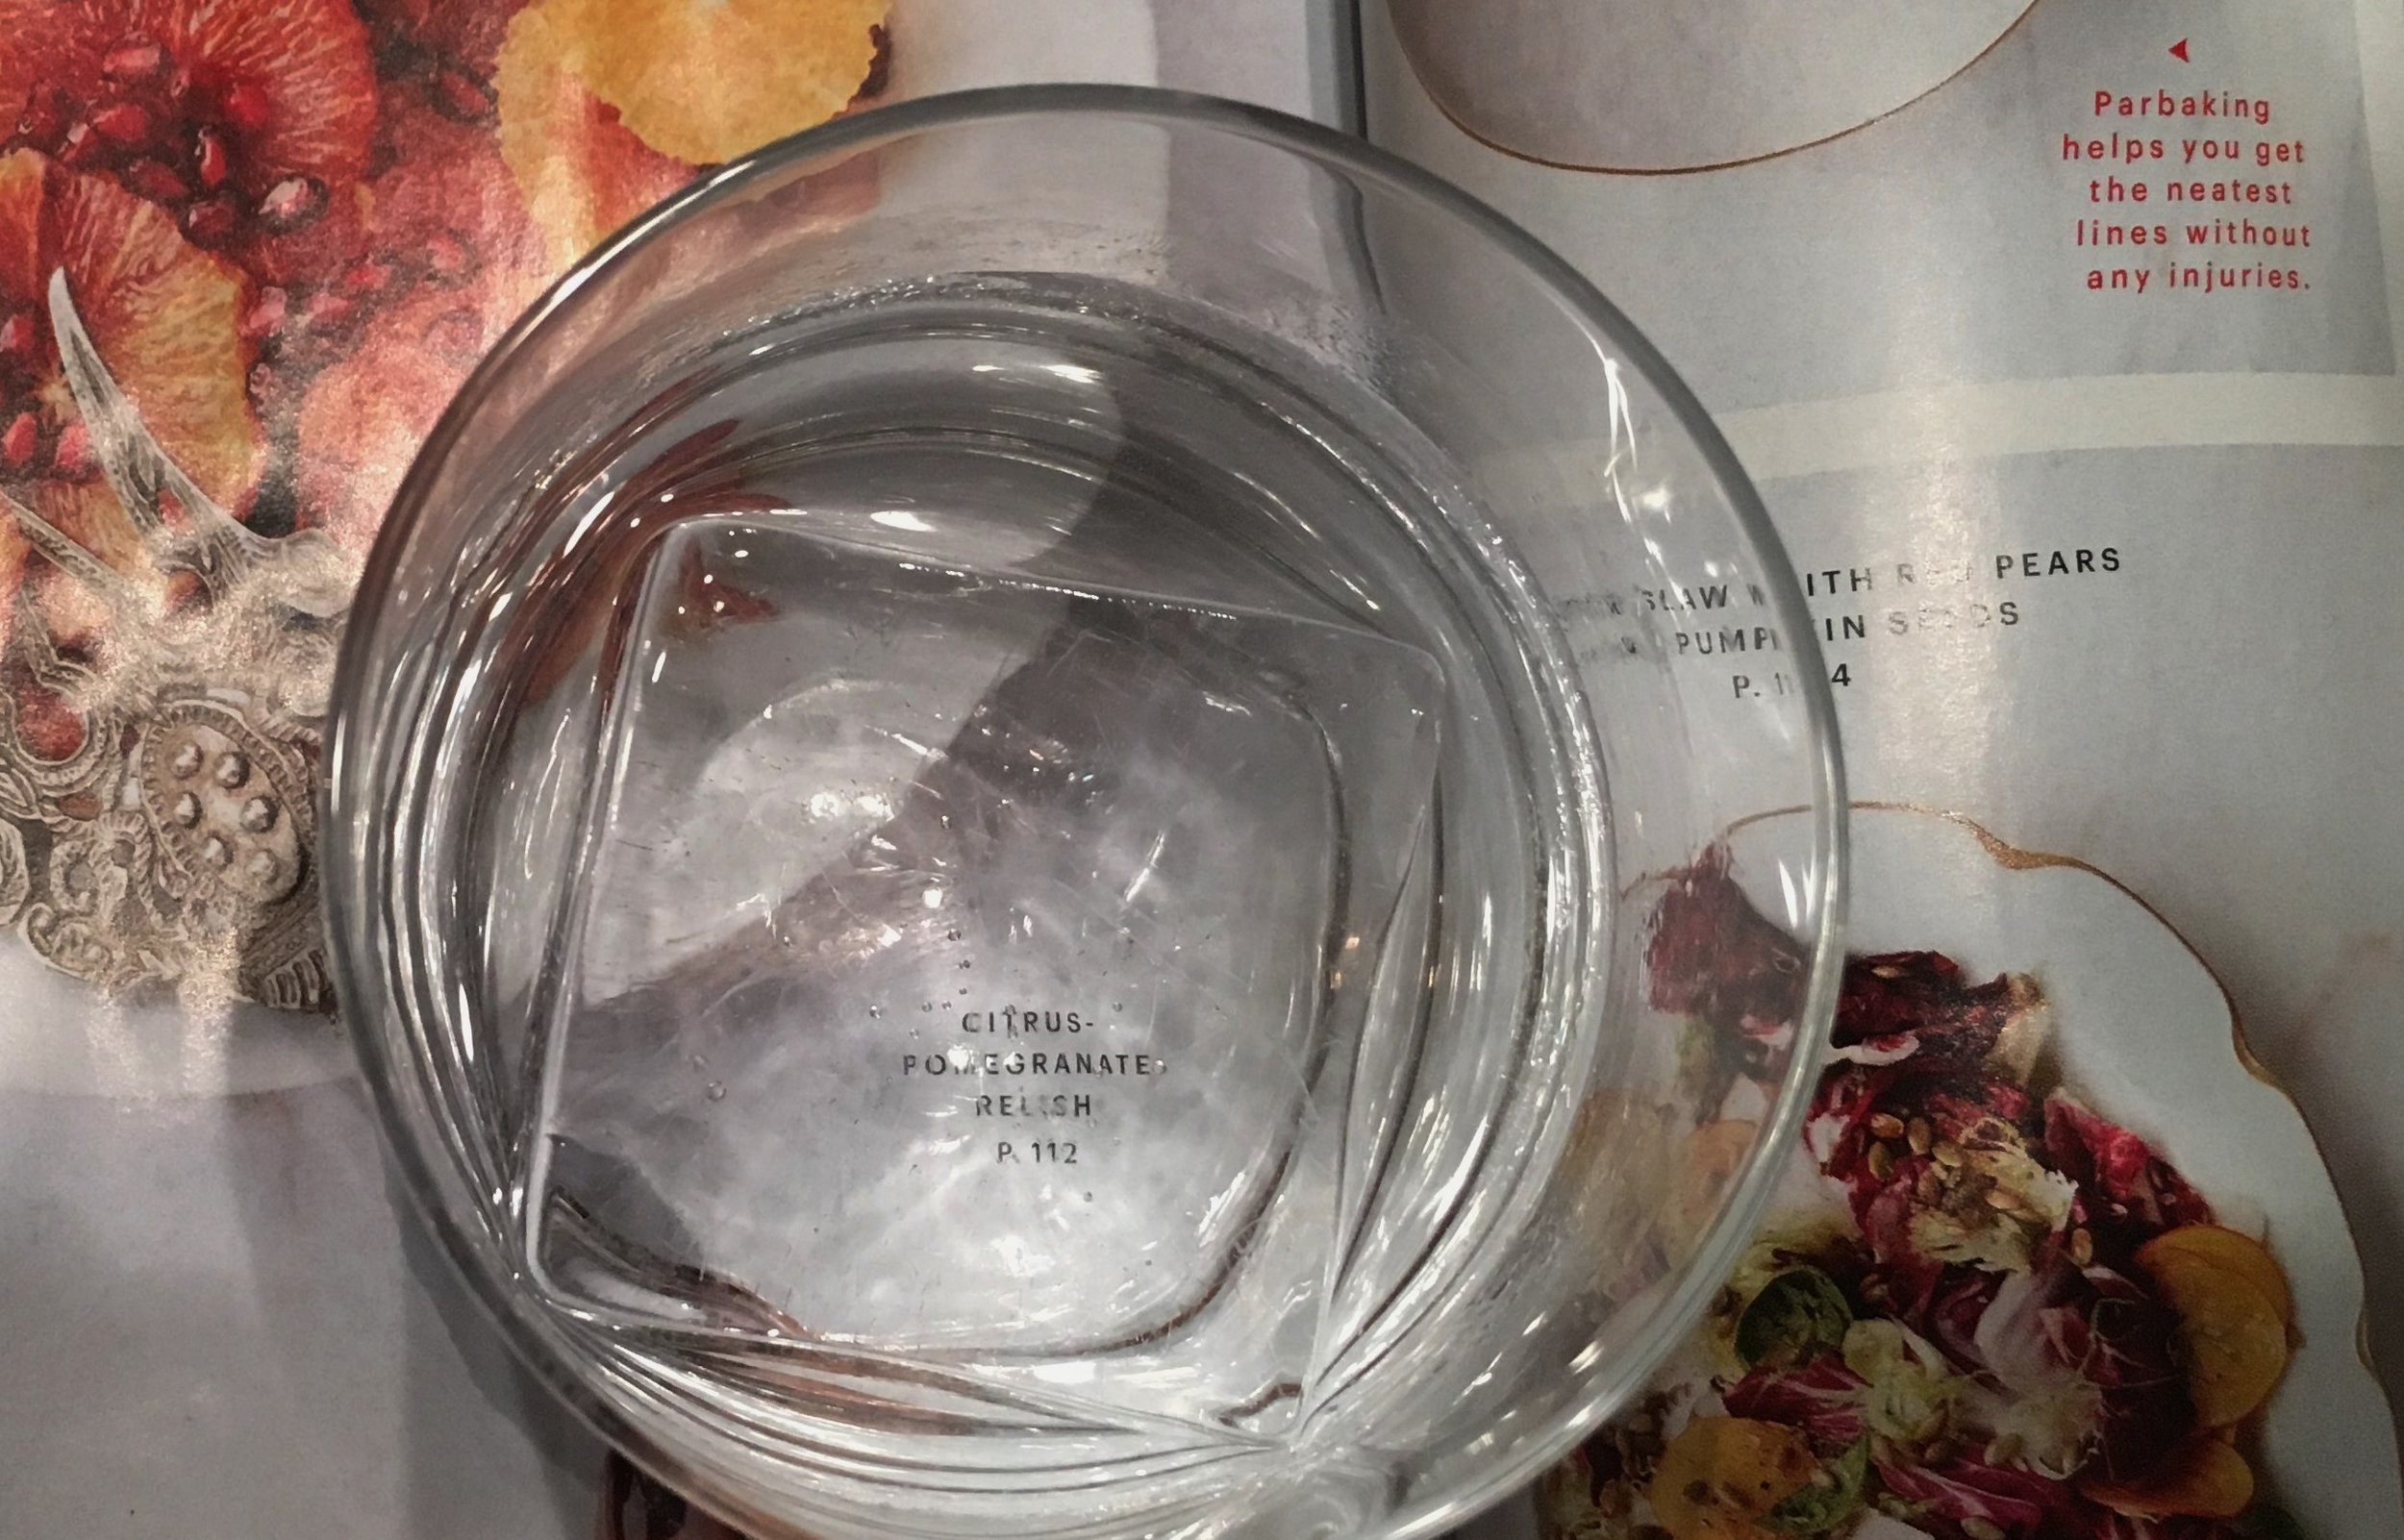 Does anyone else strive to make clear ice? : r/whiskey